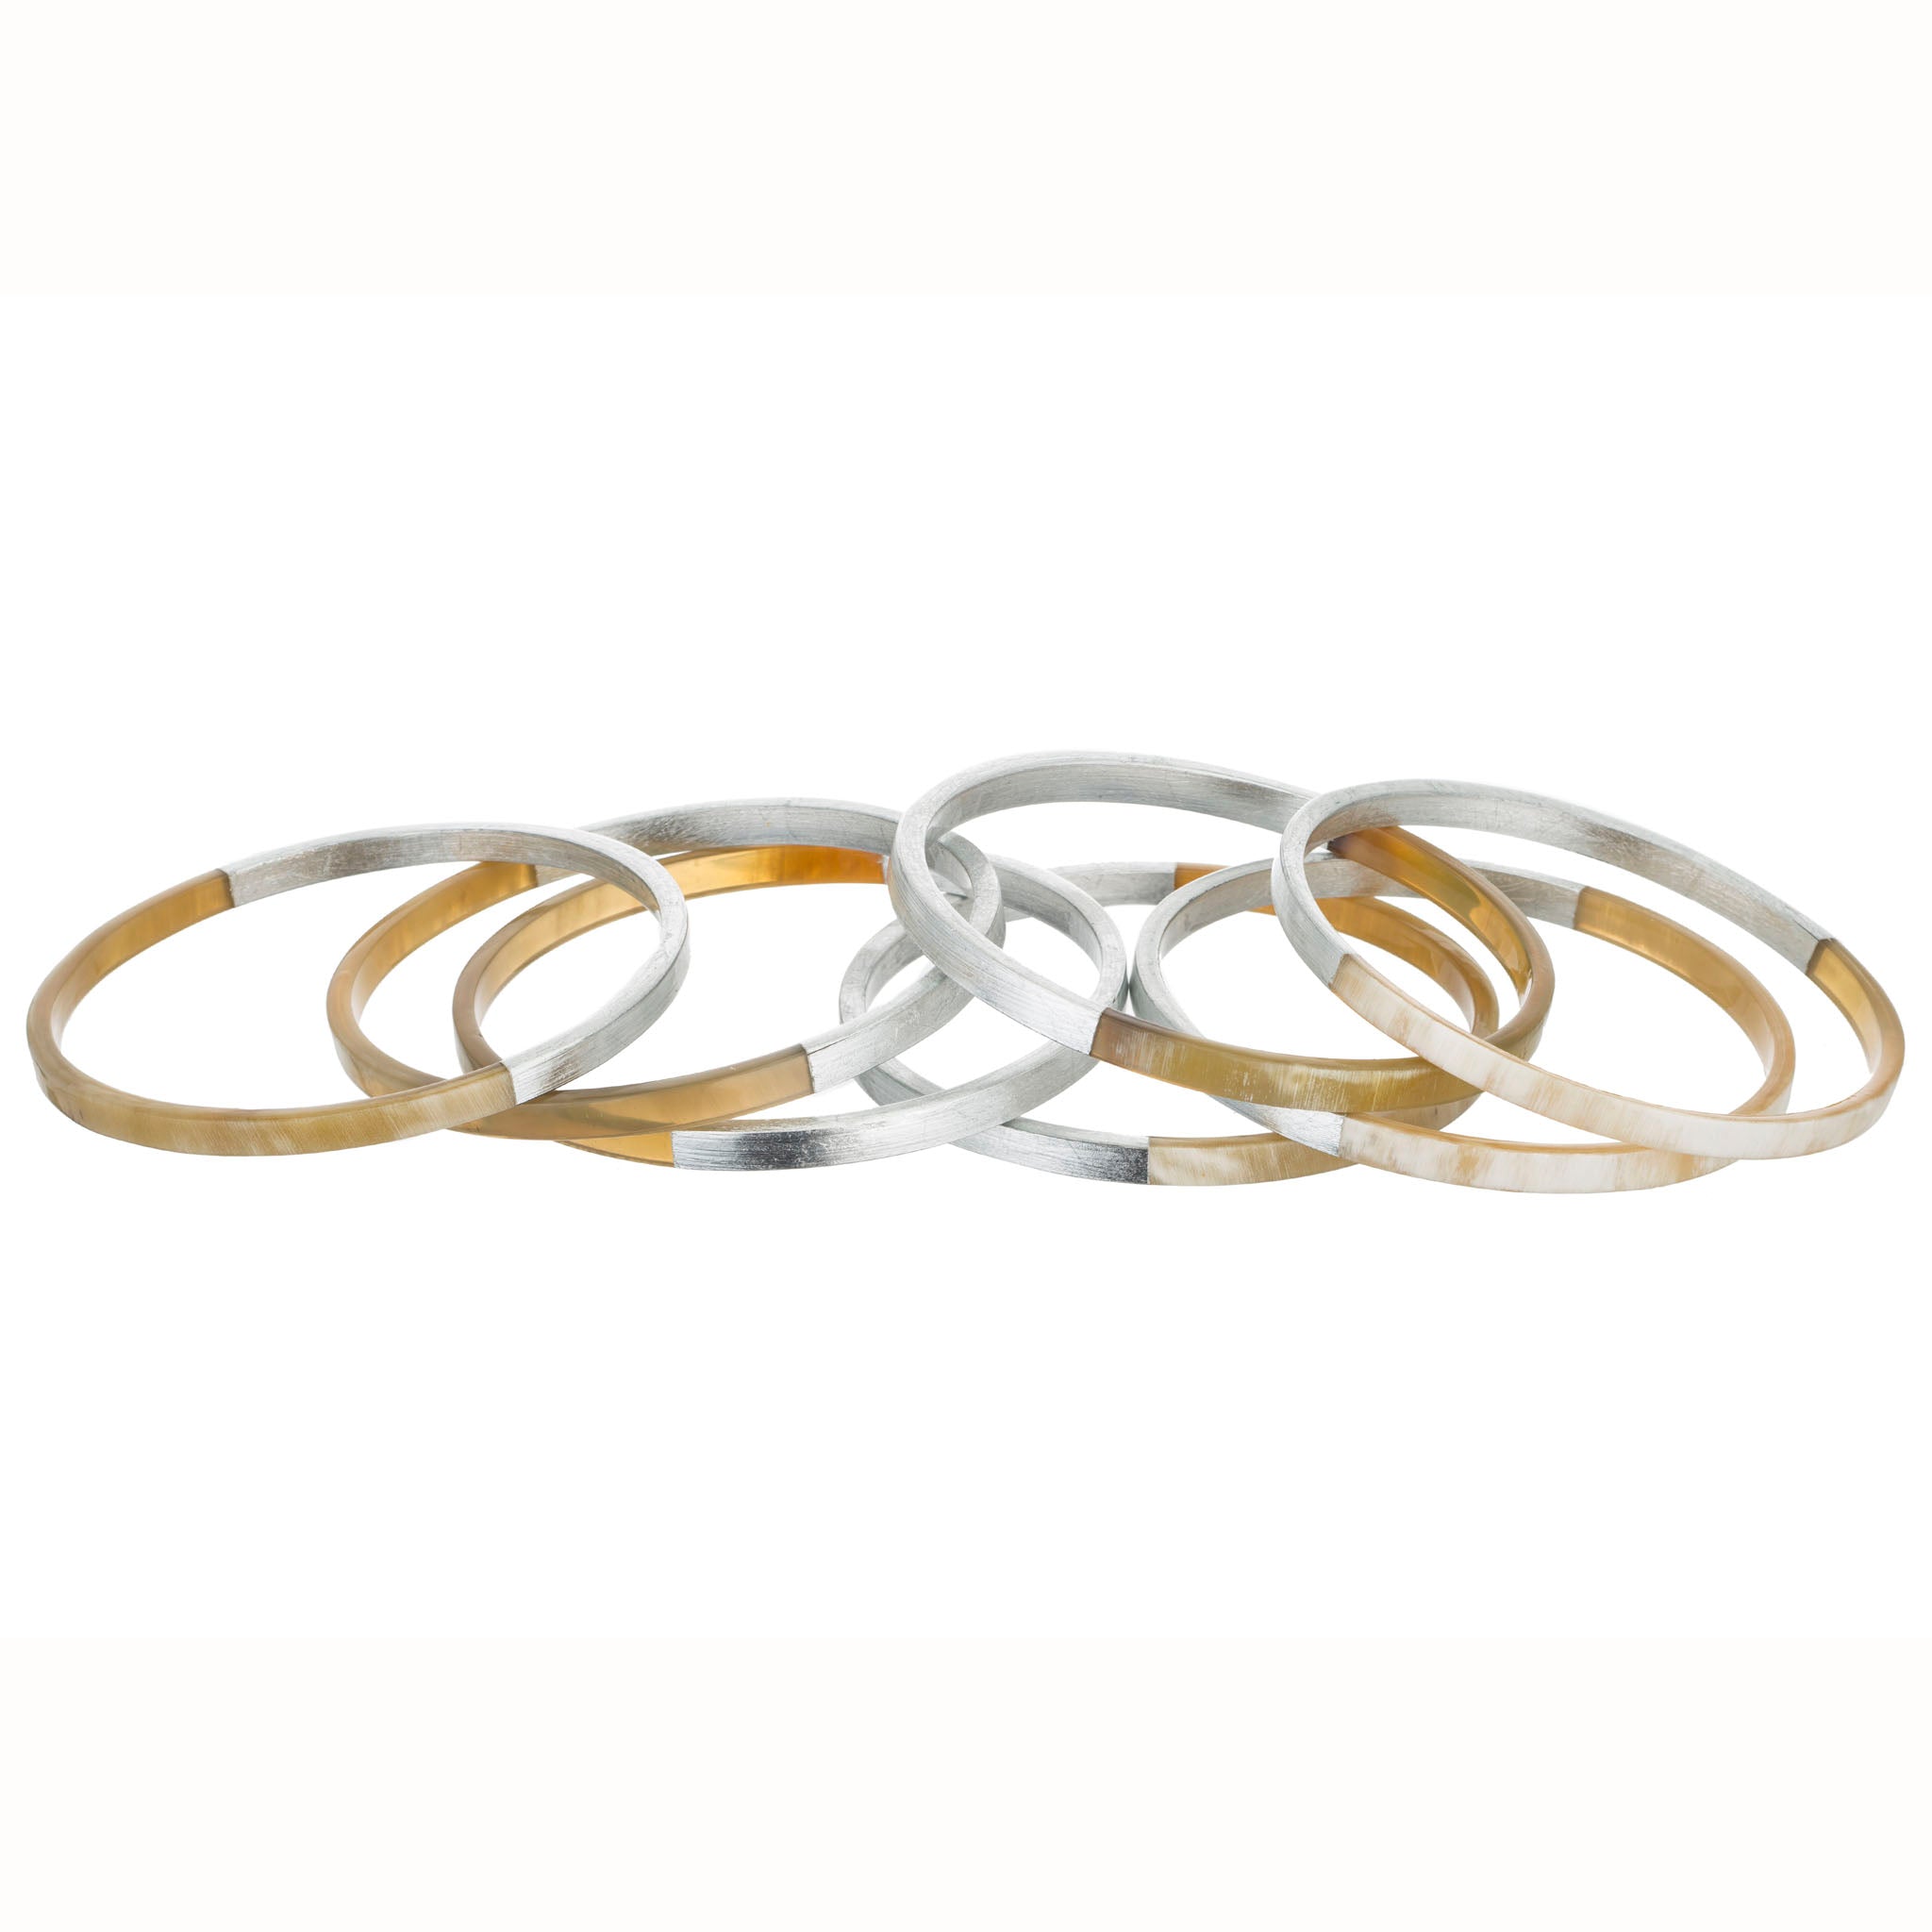 Horn Bangle Set With Lacquer